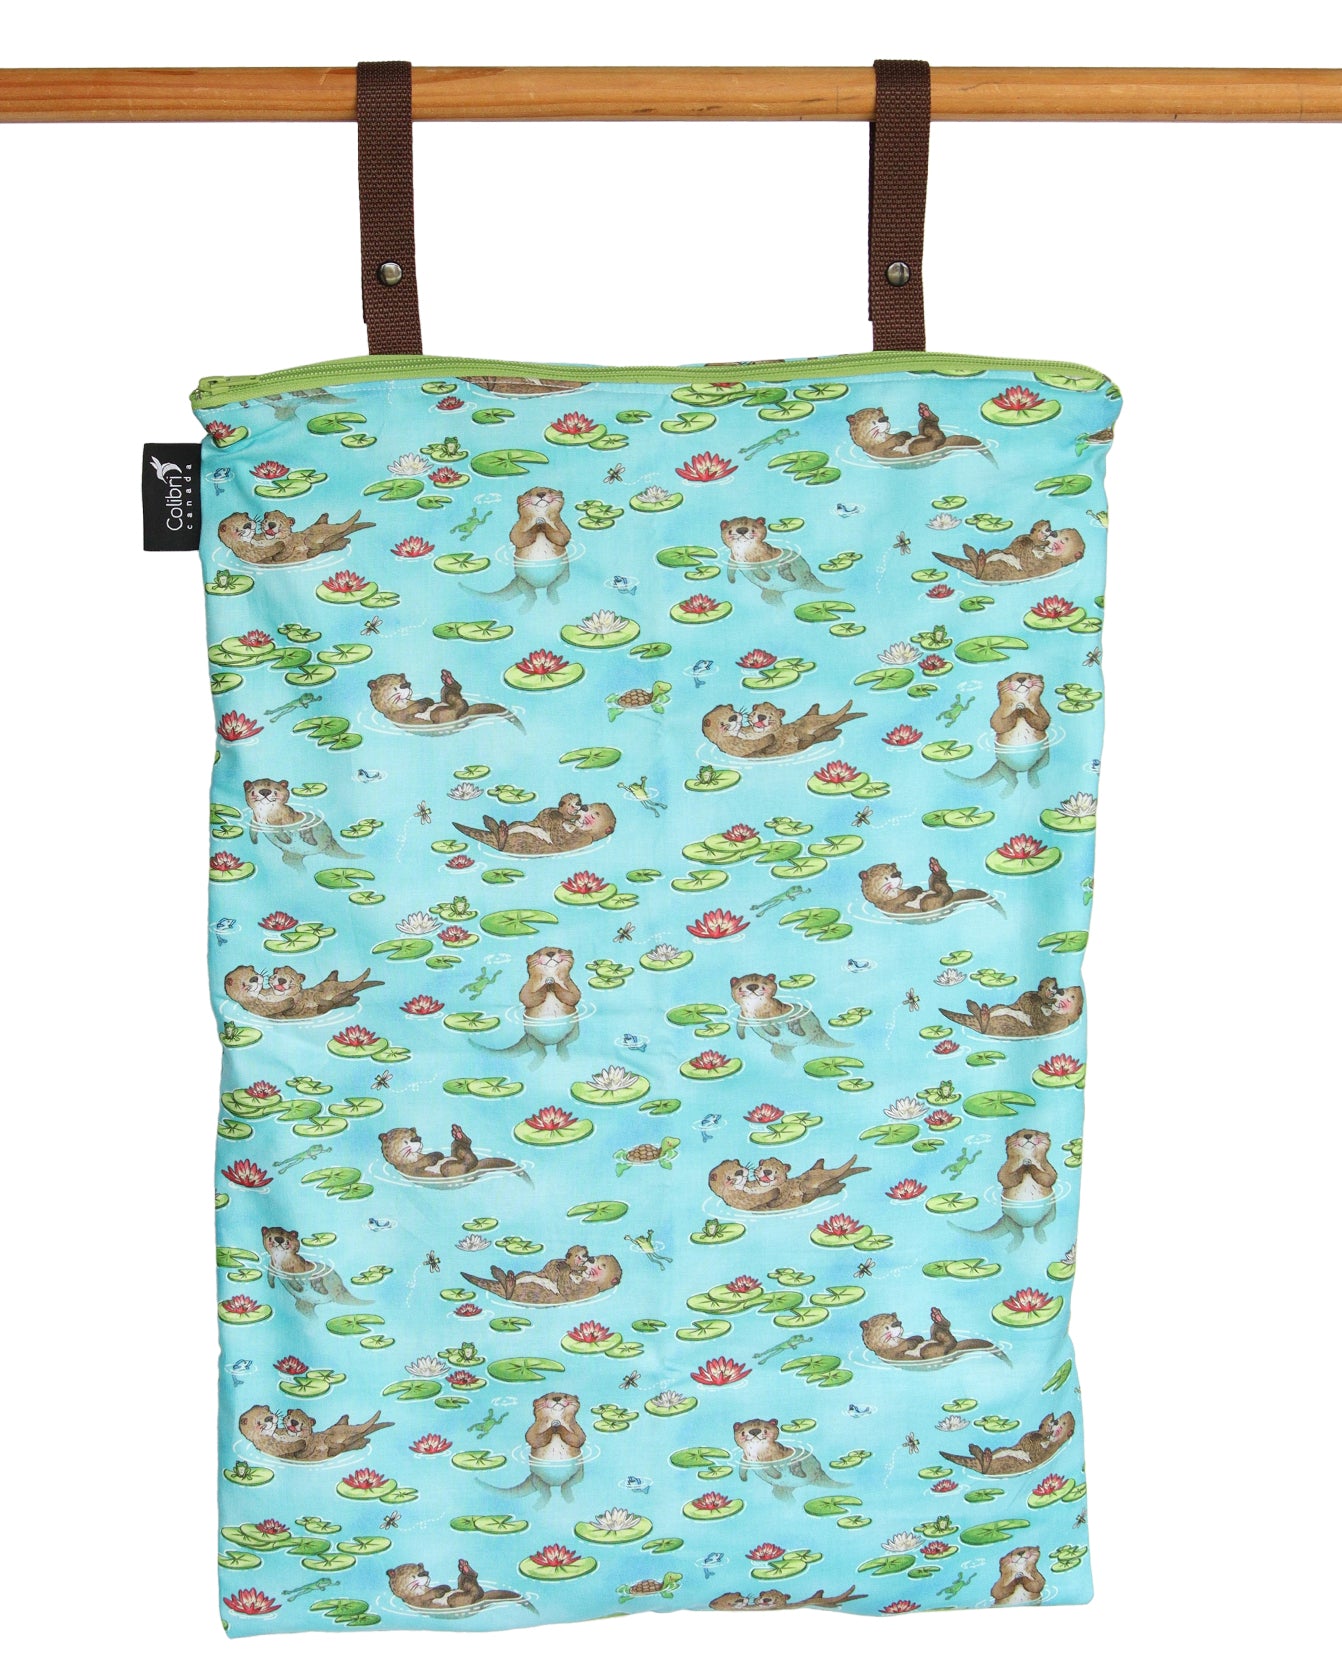 4143 - Otters Extra Large Wet Bag